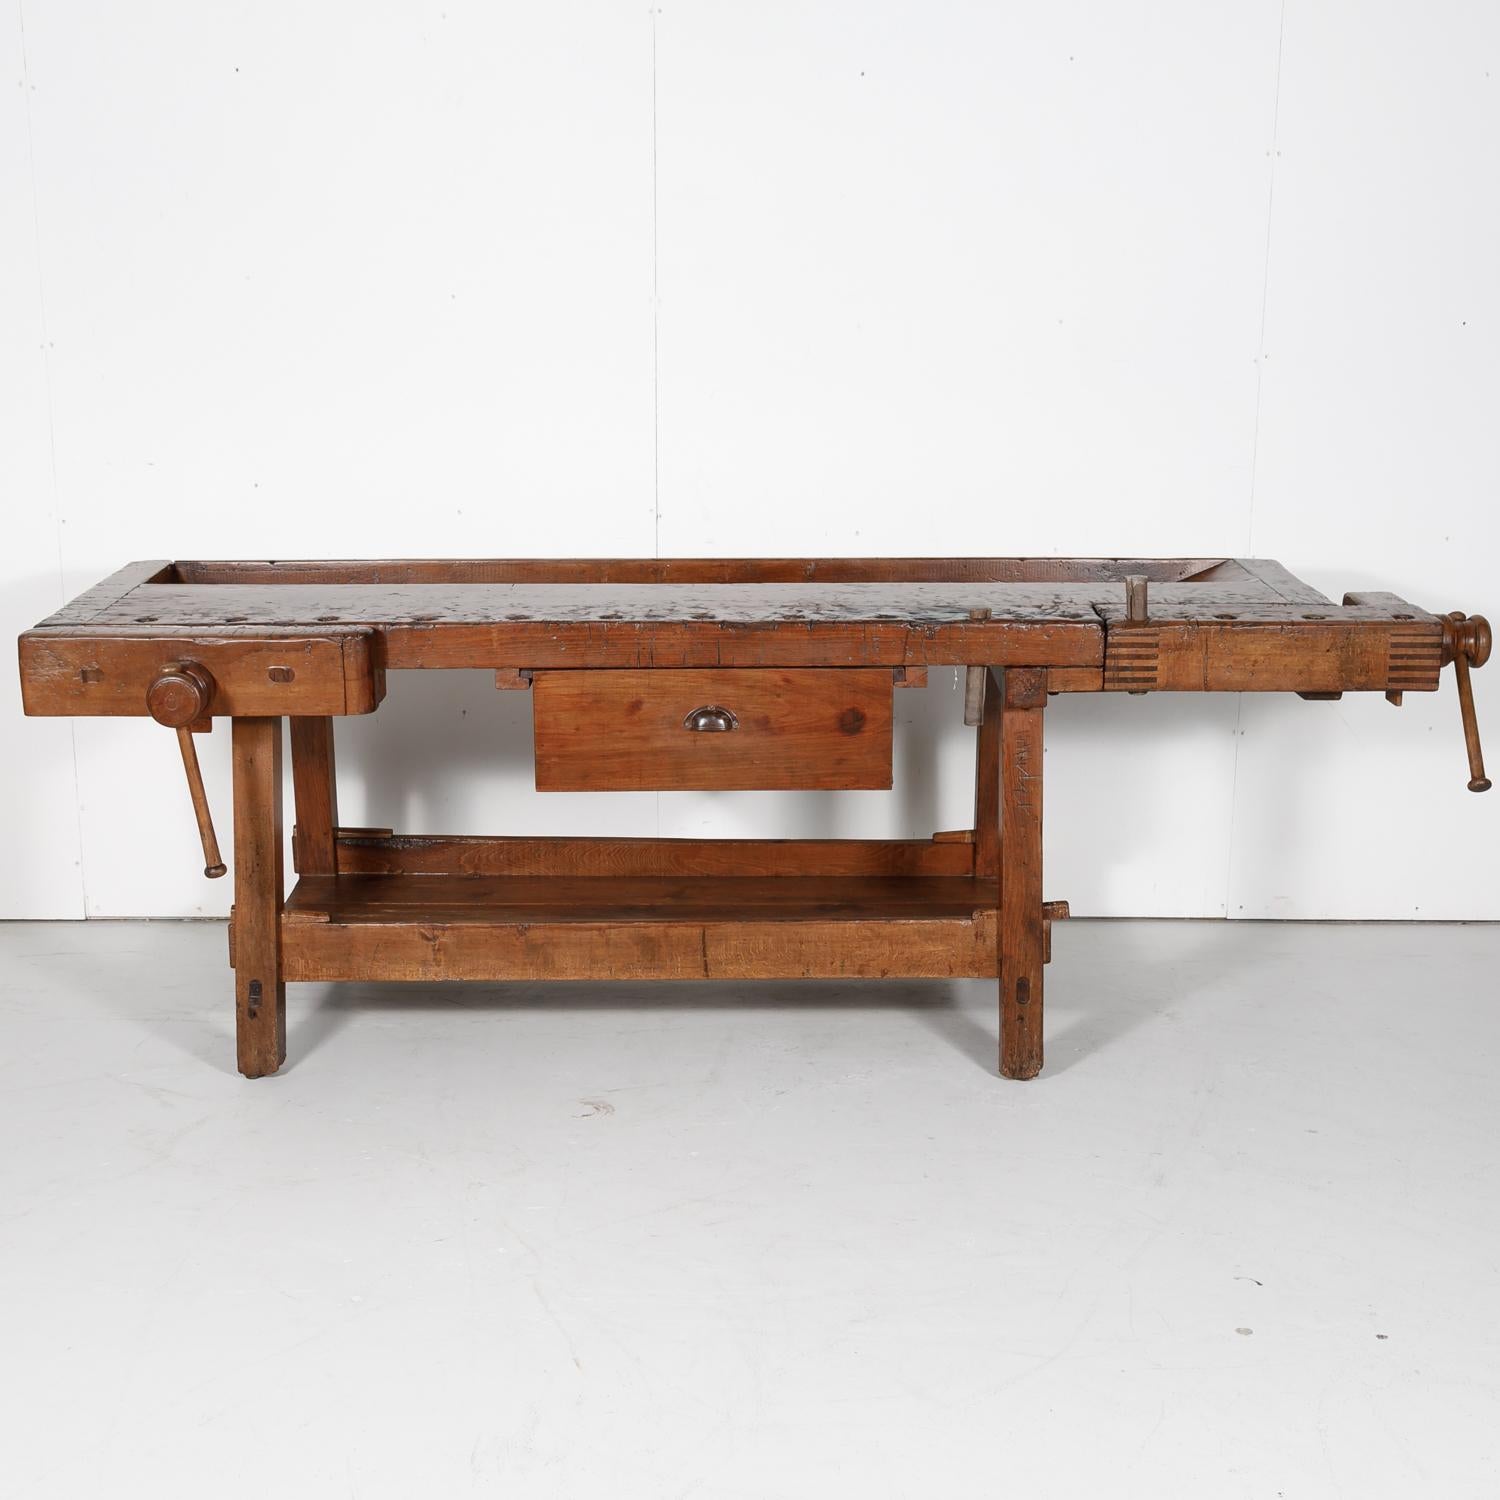 19th century French etabli or carpenter's workbench hand constructed of pine and chestnut in the South of France near Uzés, having a top that is almost five inches thick, trestle legs, and a bottom shelf. The surface of this rustic carpenter's